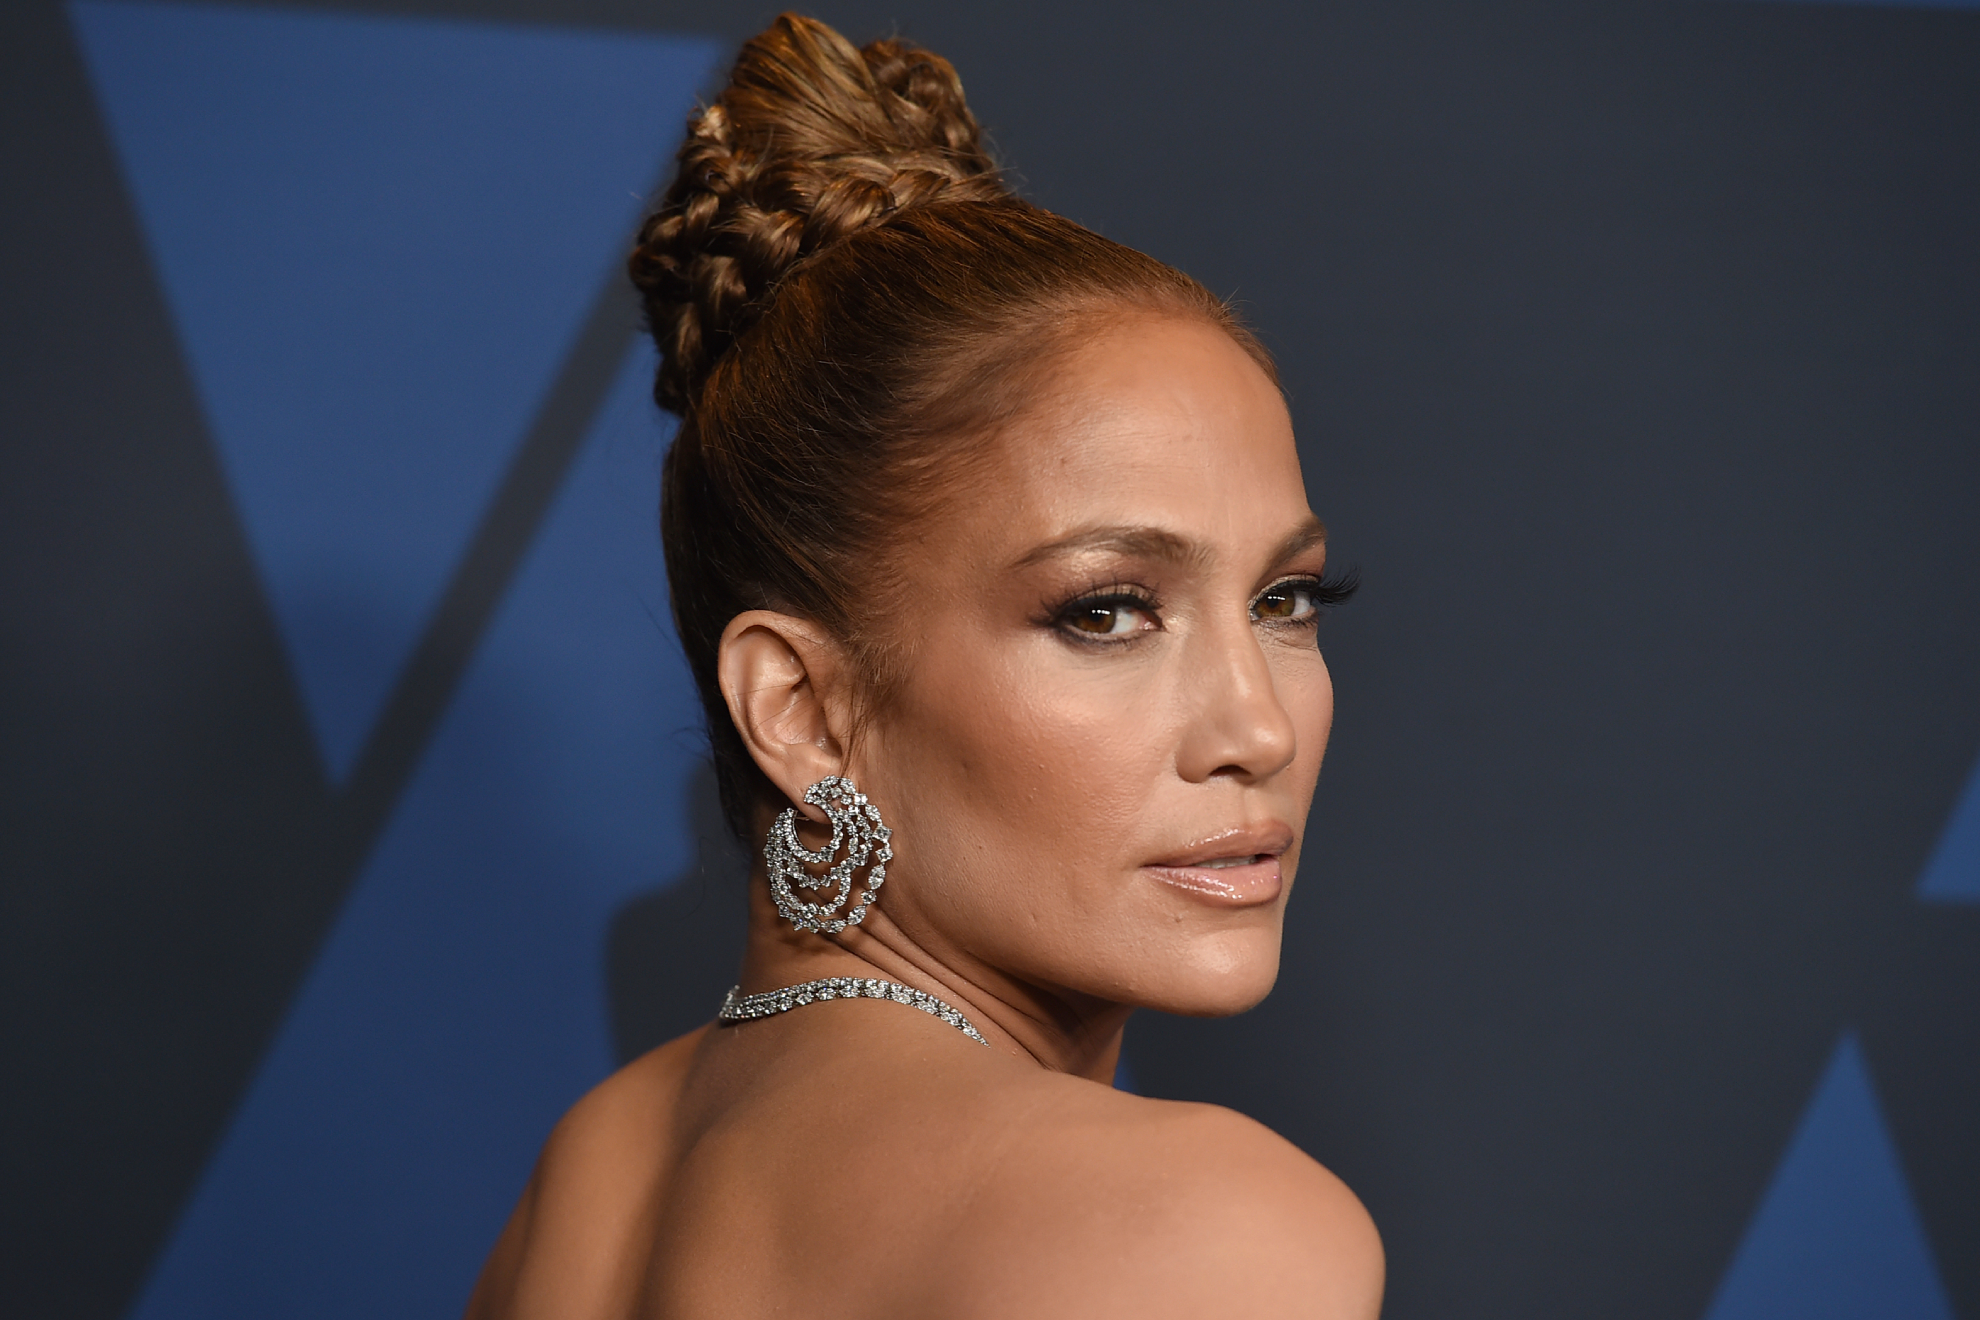 Jennifer Lopez reveals underboob in polarizing outfit: Did her worse enemy dress her?